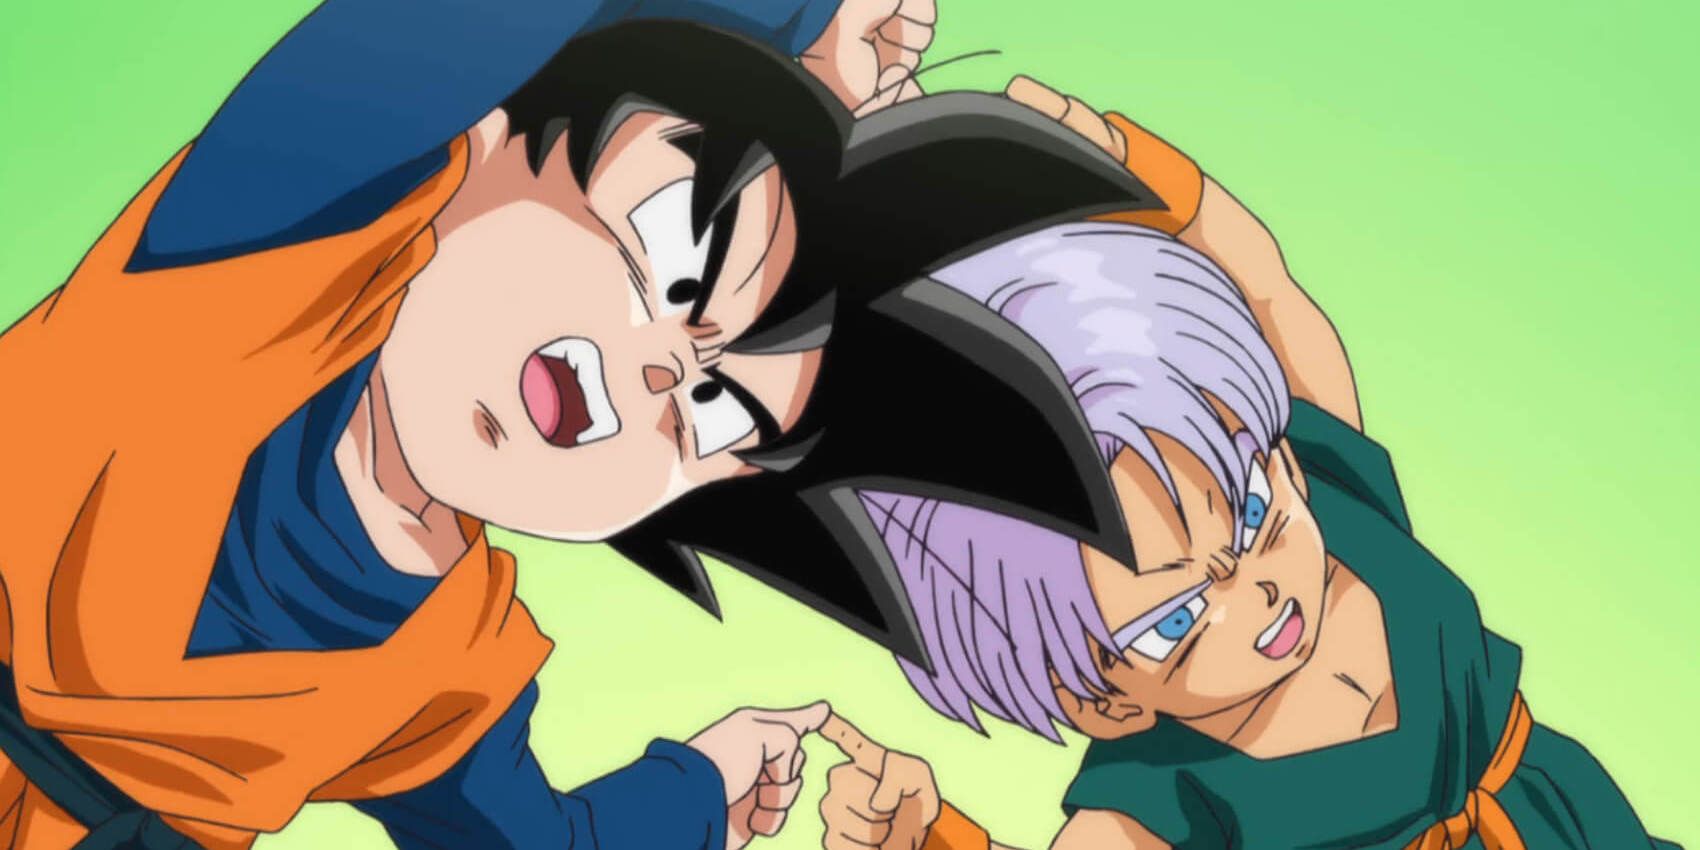  Dragon Ball Super Trunks and Goten doing the fusion